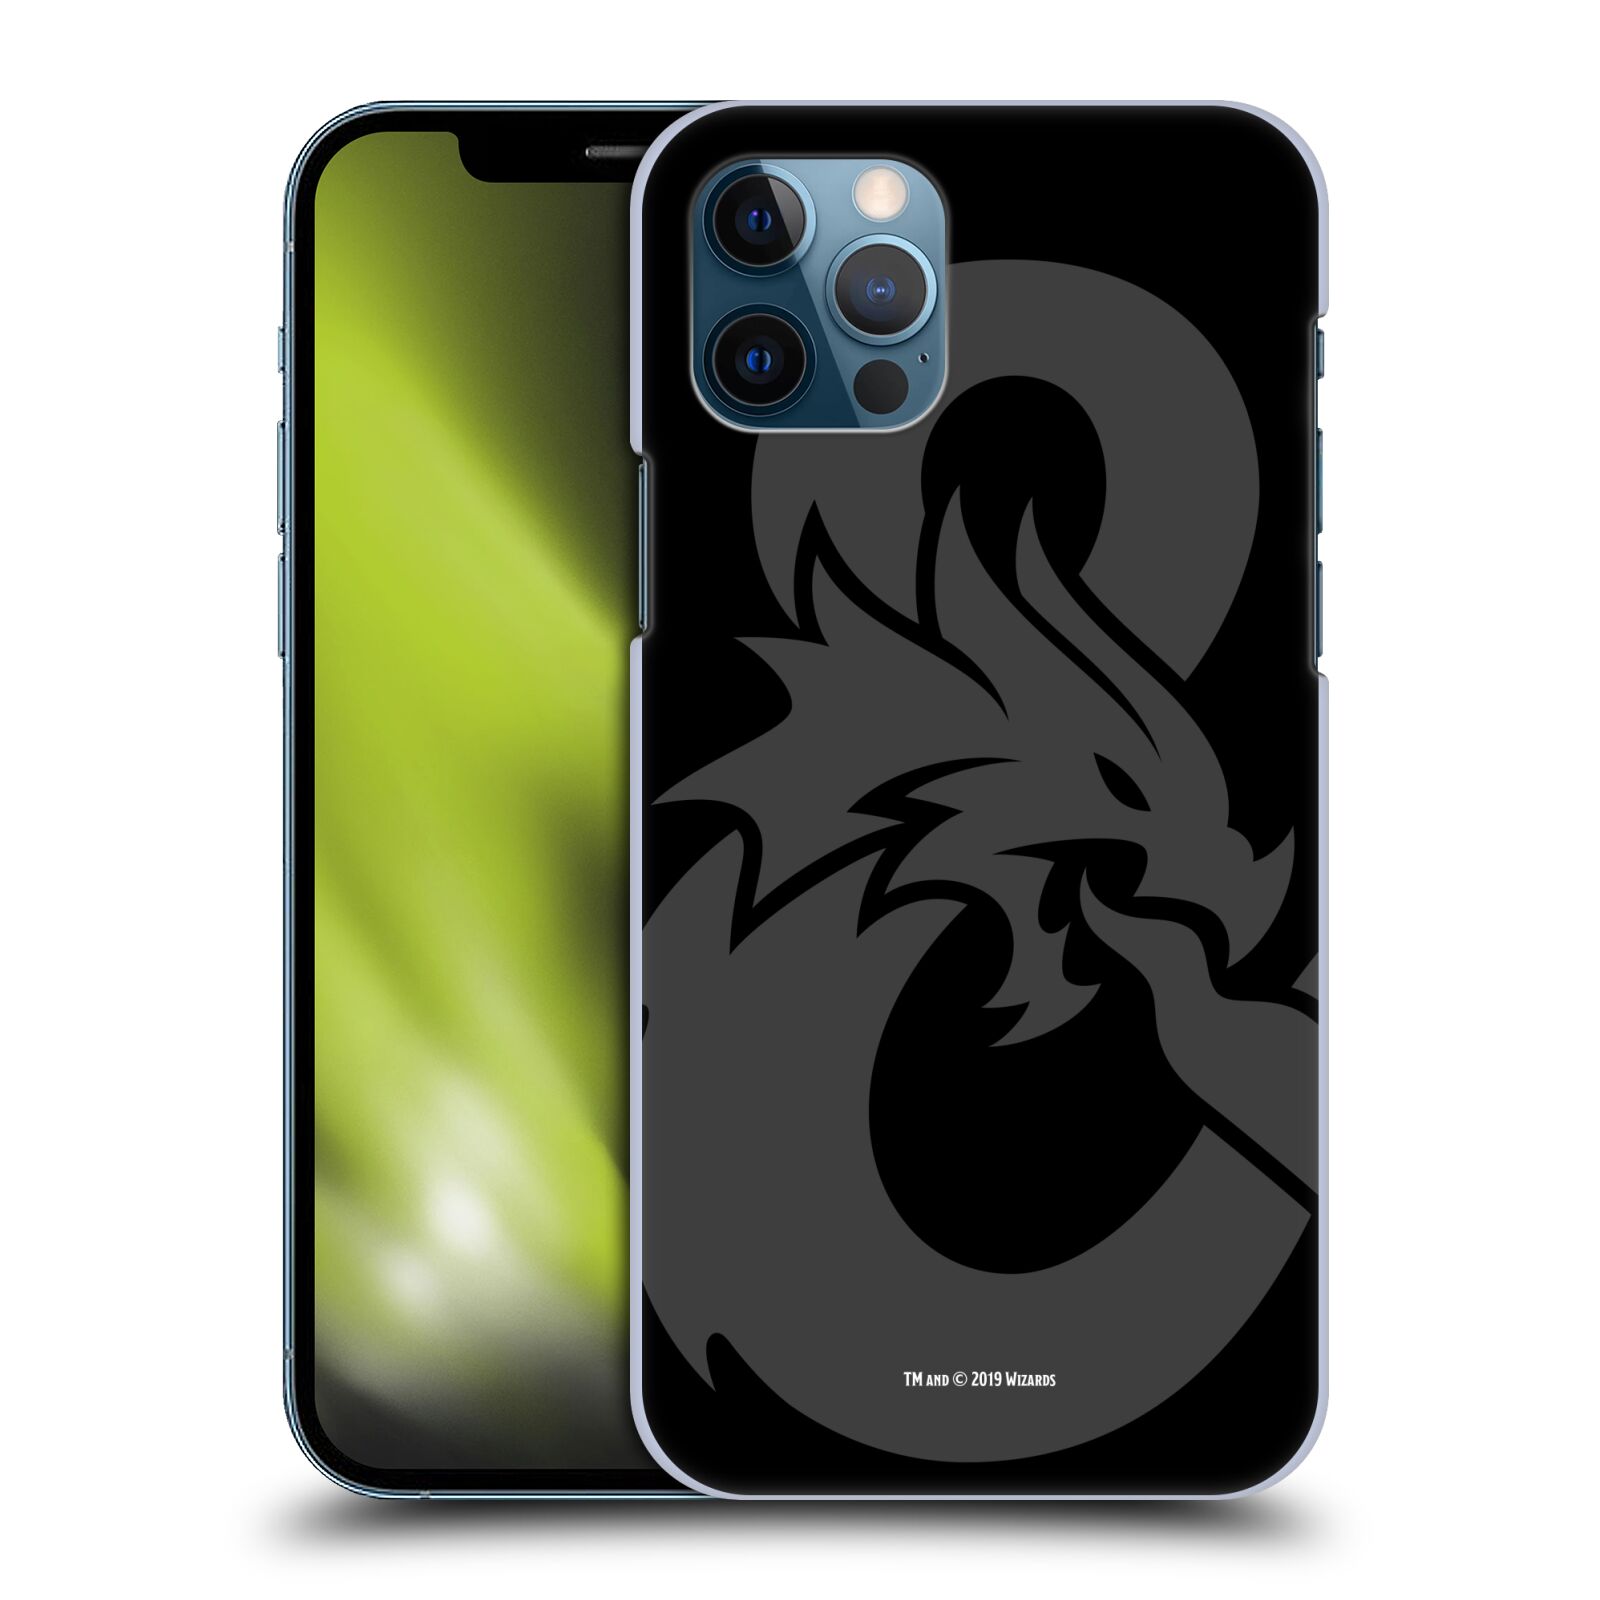 Zadní obal pro mobil Apple iPhone 12 / iPhone 12 Pro - HEAD CASE - Fantasy - Dungeons and Dragons - Znak